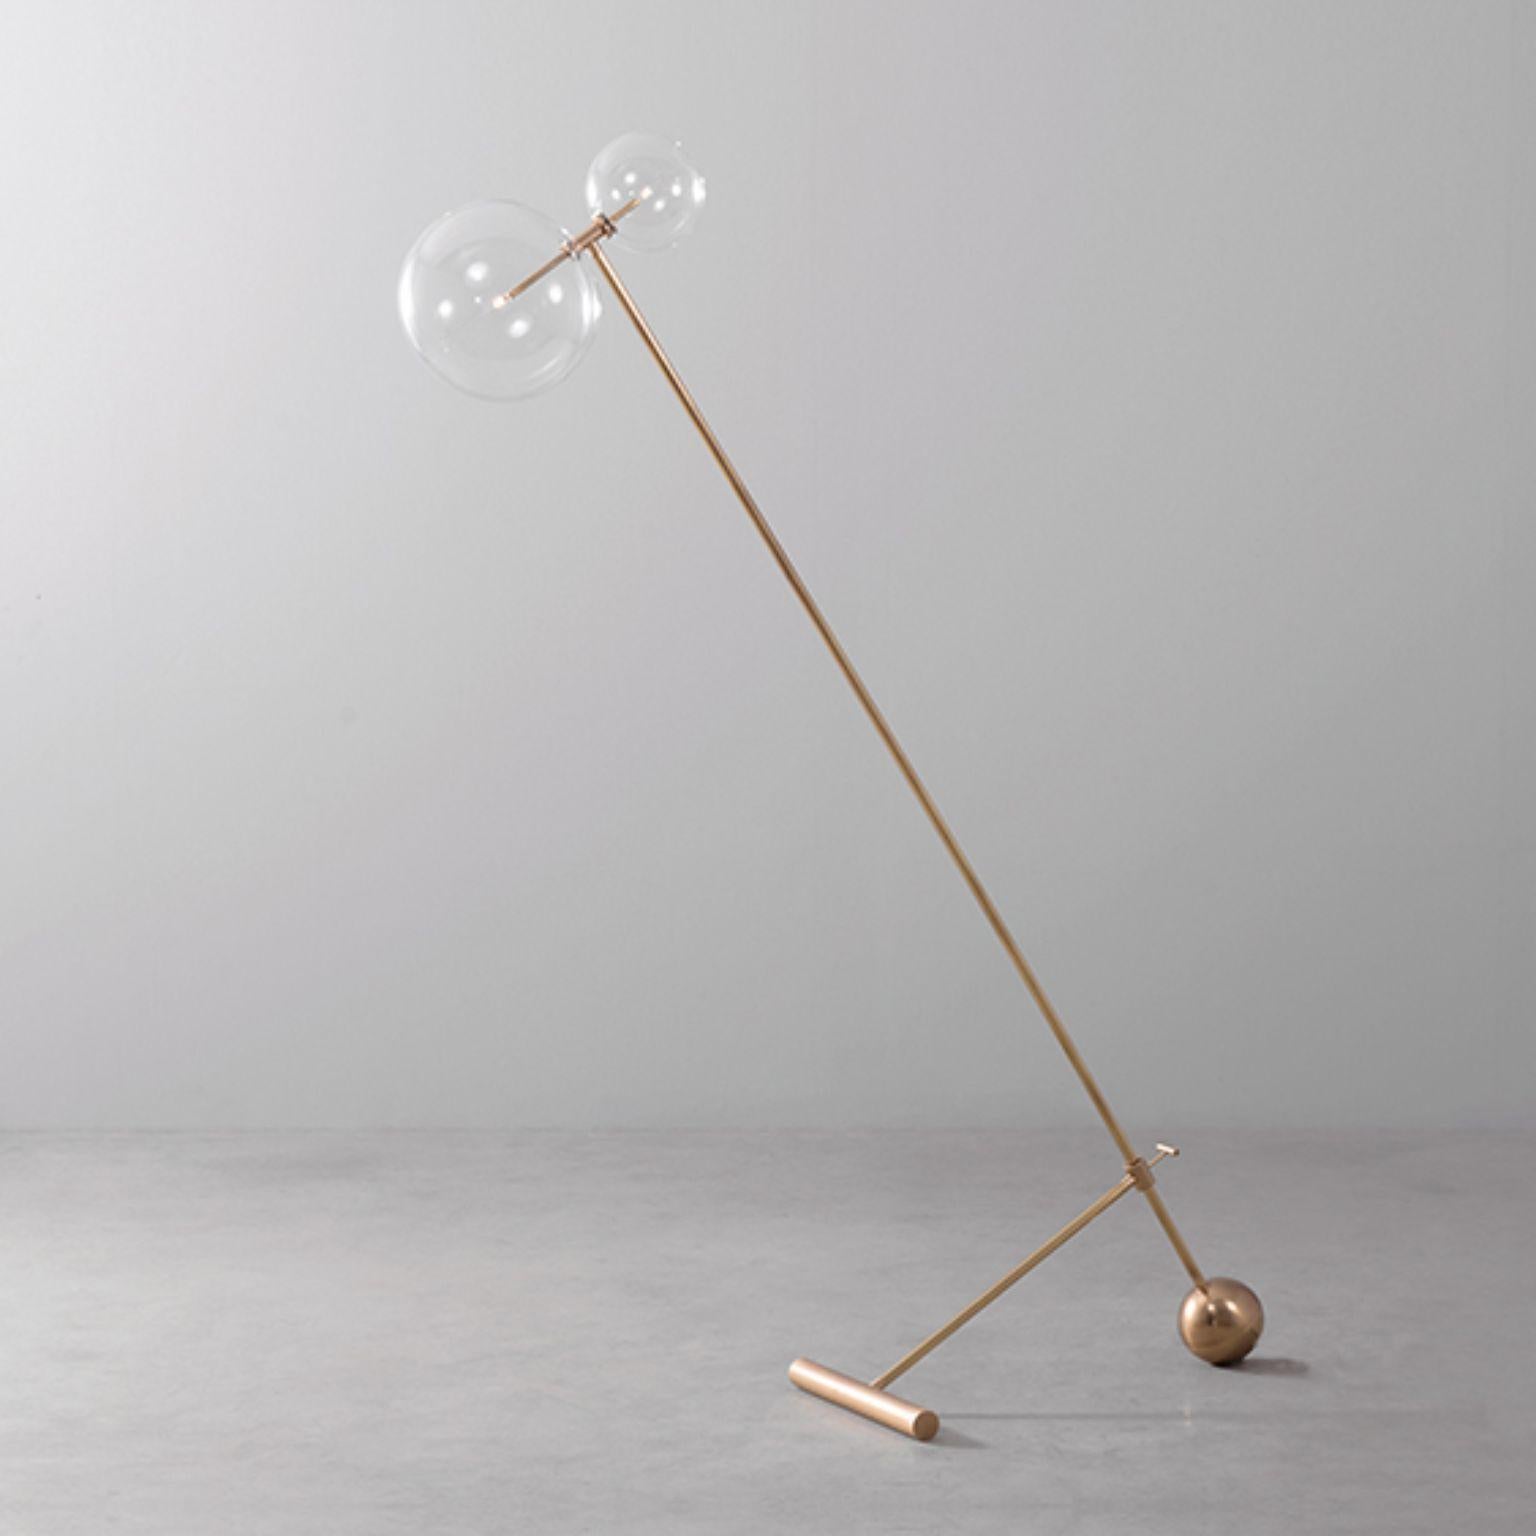 Contemporary brass floor lamp by Schwung
Dimensions: W 25, W D 110 x H 167 cm
Materials: Natural brass, hand blown glass globes
Other finishes available.

Cord 2m with inline on-off switch and plug. Switch location 50cm from the base.
Glass globes